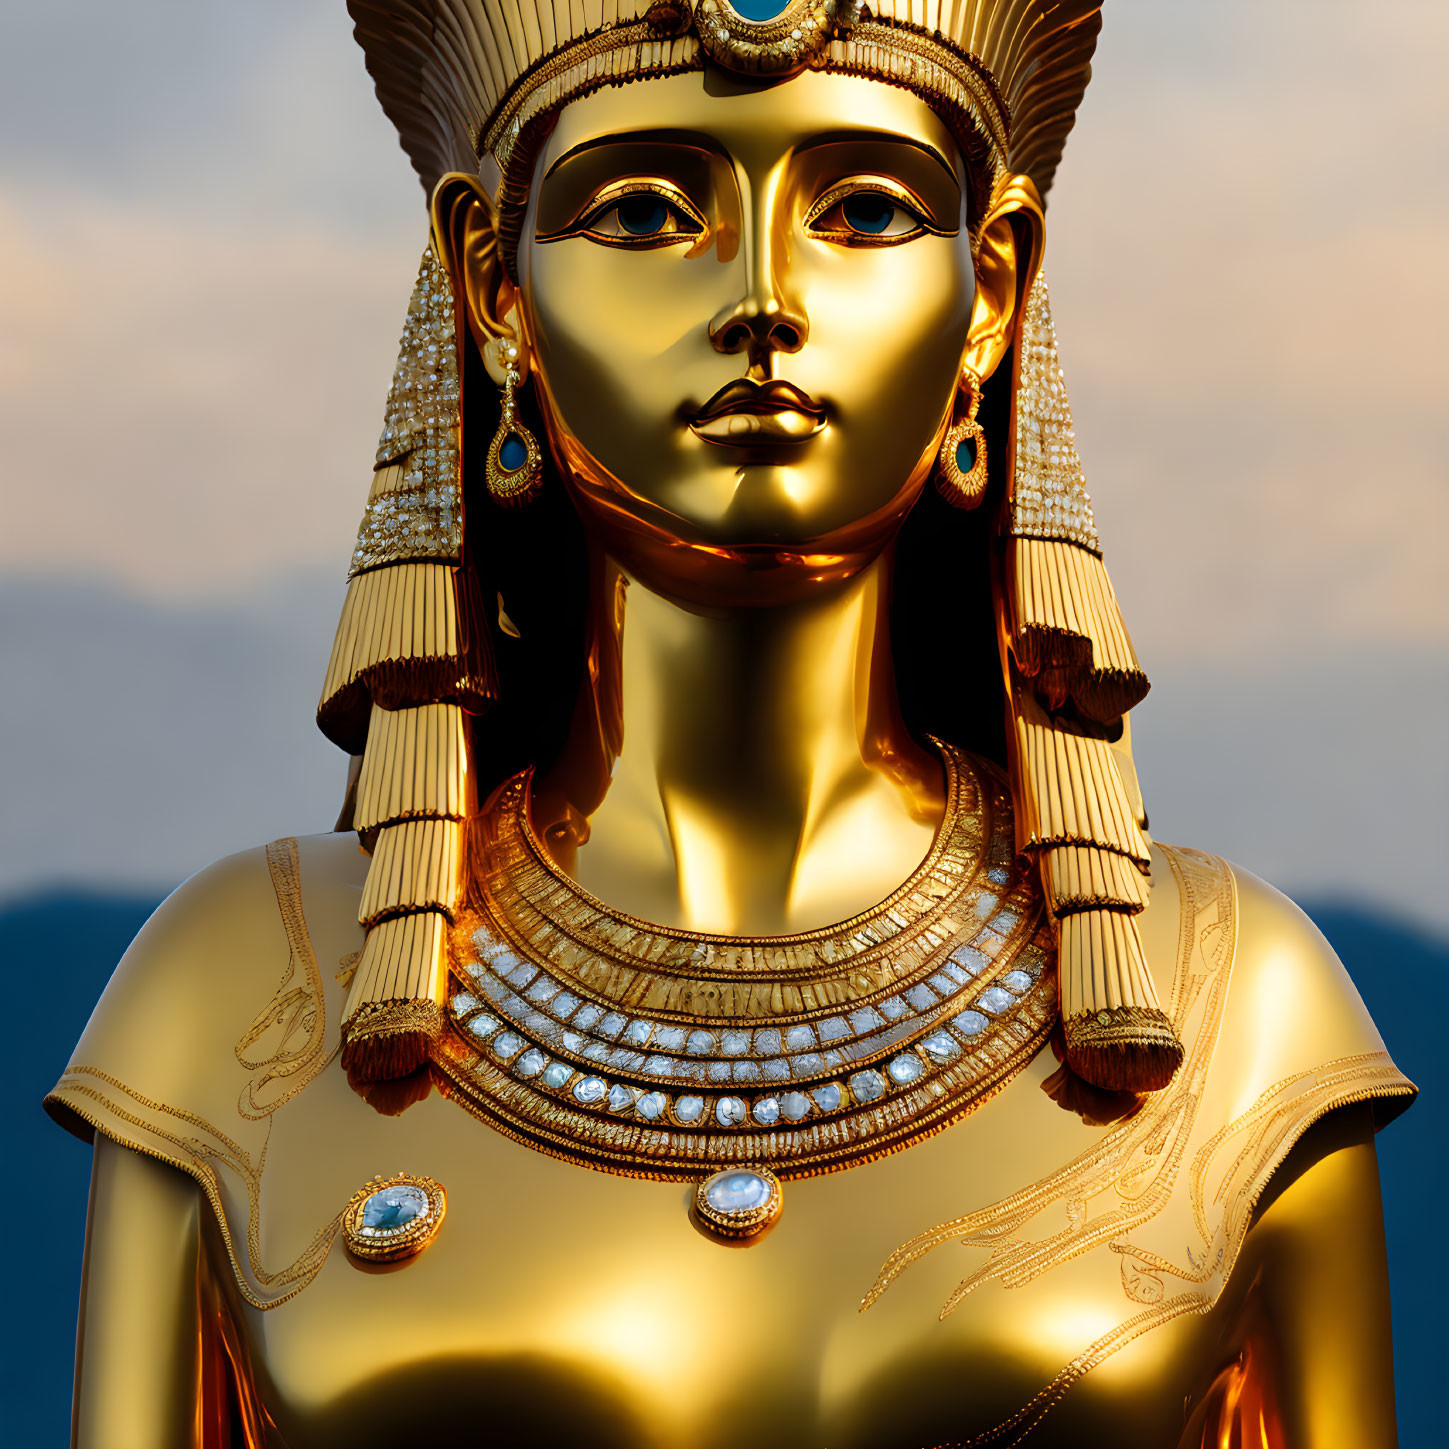 Golden Egyptian statue with pharaoh headdress and jewelry against twilight sky